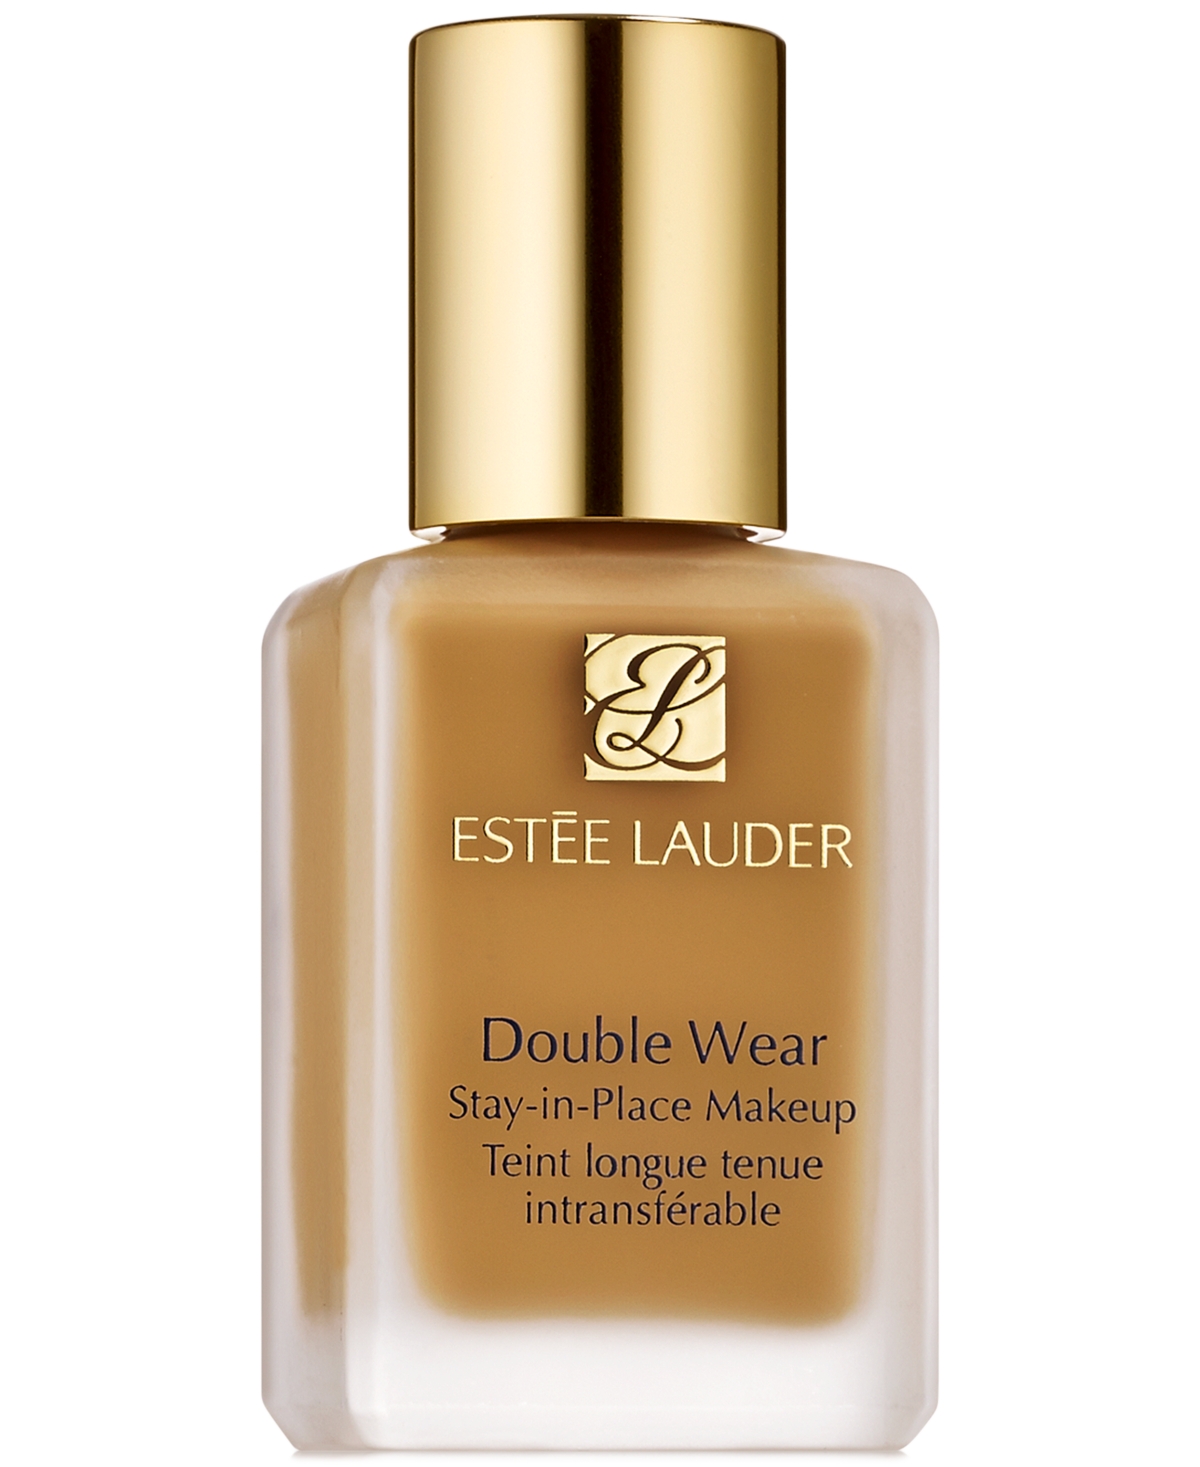 Estée Lauder Double Wear Stay-in-place Makeup, 1 Oz. In N Spiced Sand Medium Tan With Neutral,s